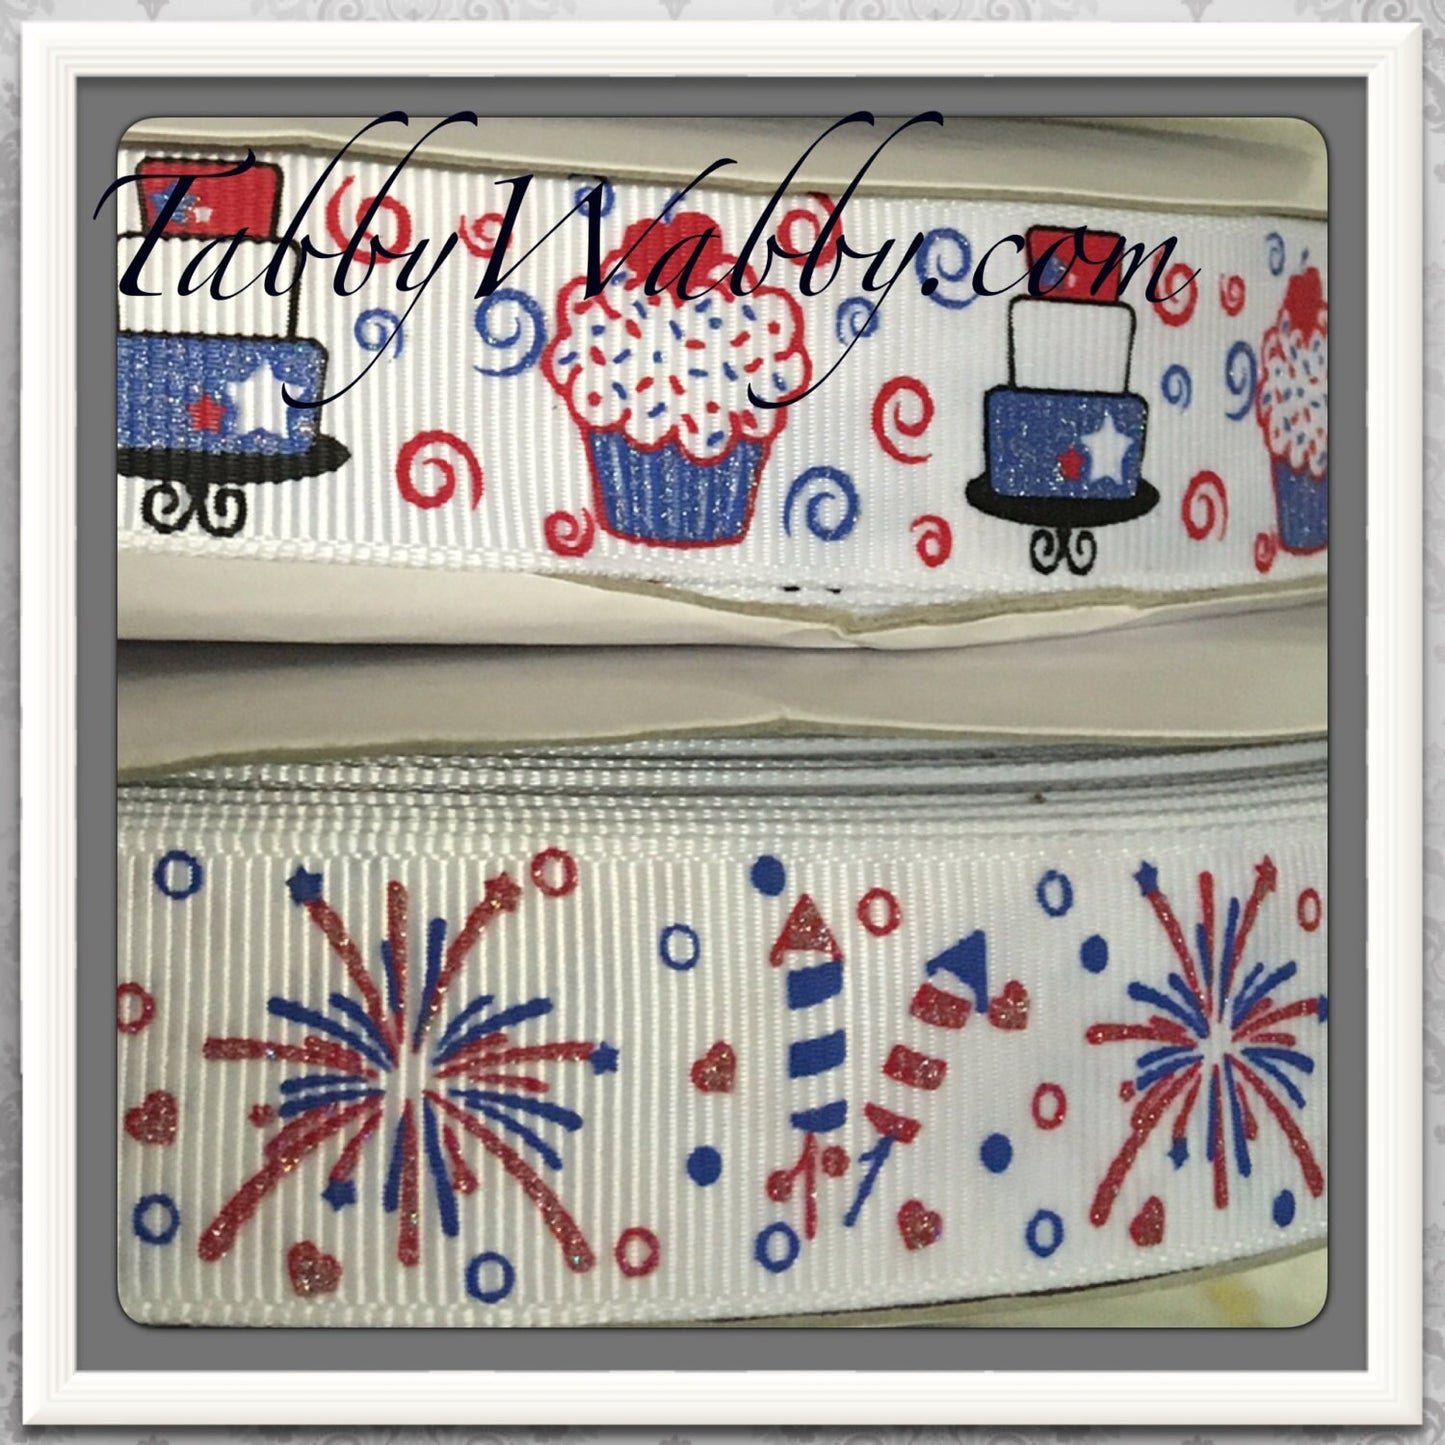 Rockets & Fireworks, Cup Cakes * Cakes USA Pride 6 yds 7/8" on white 2 yards each design TWRH